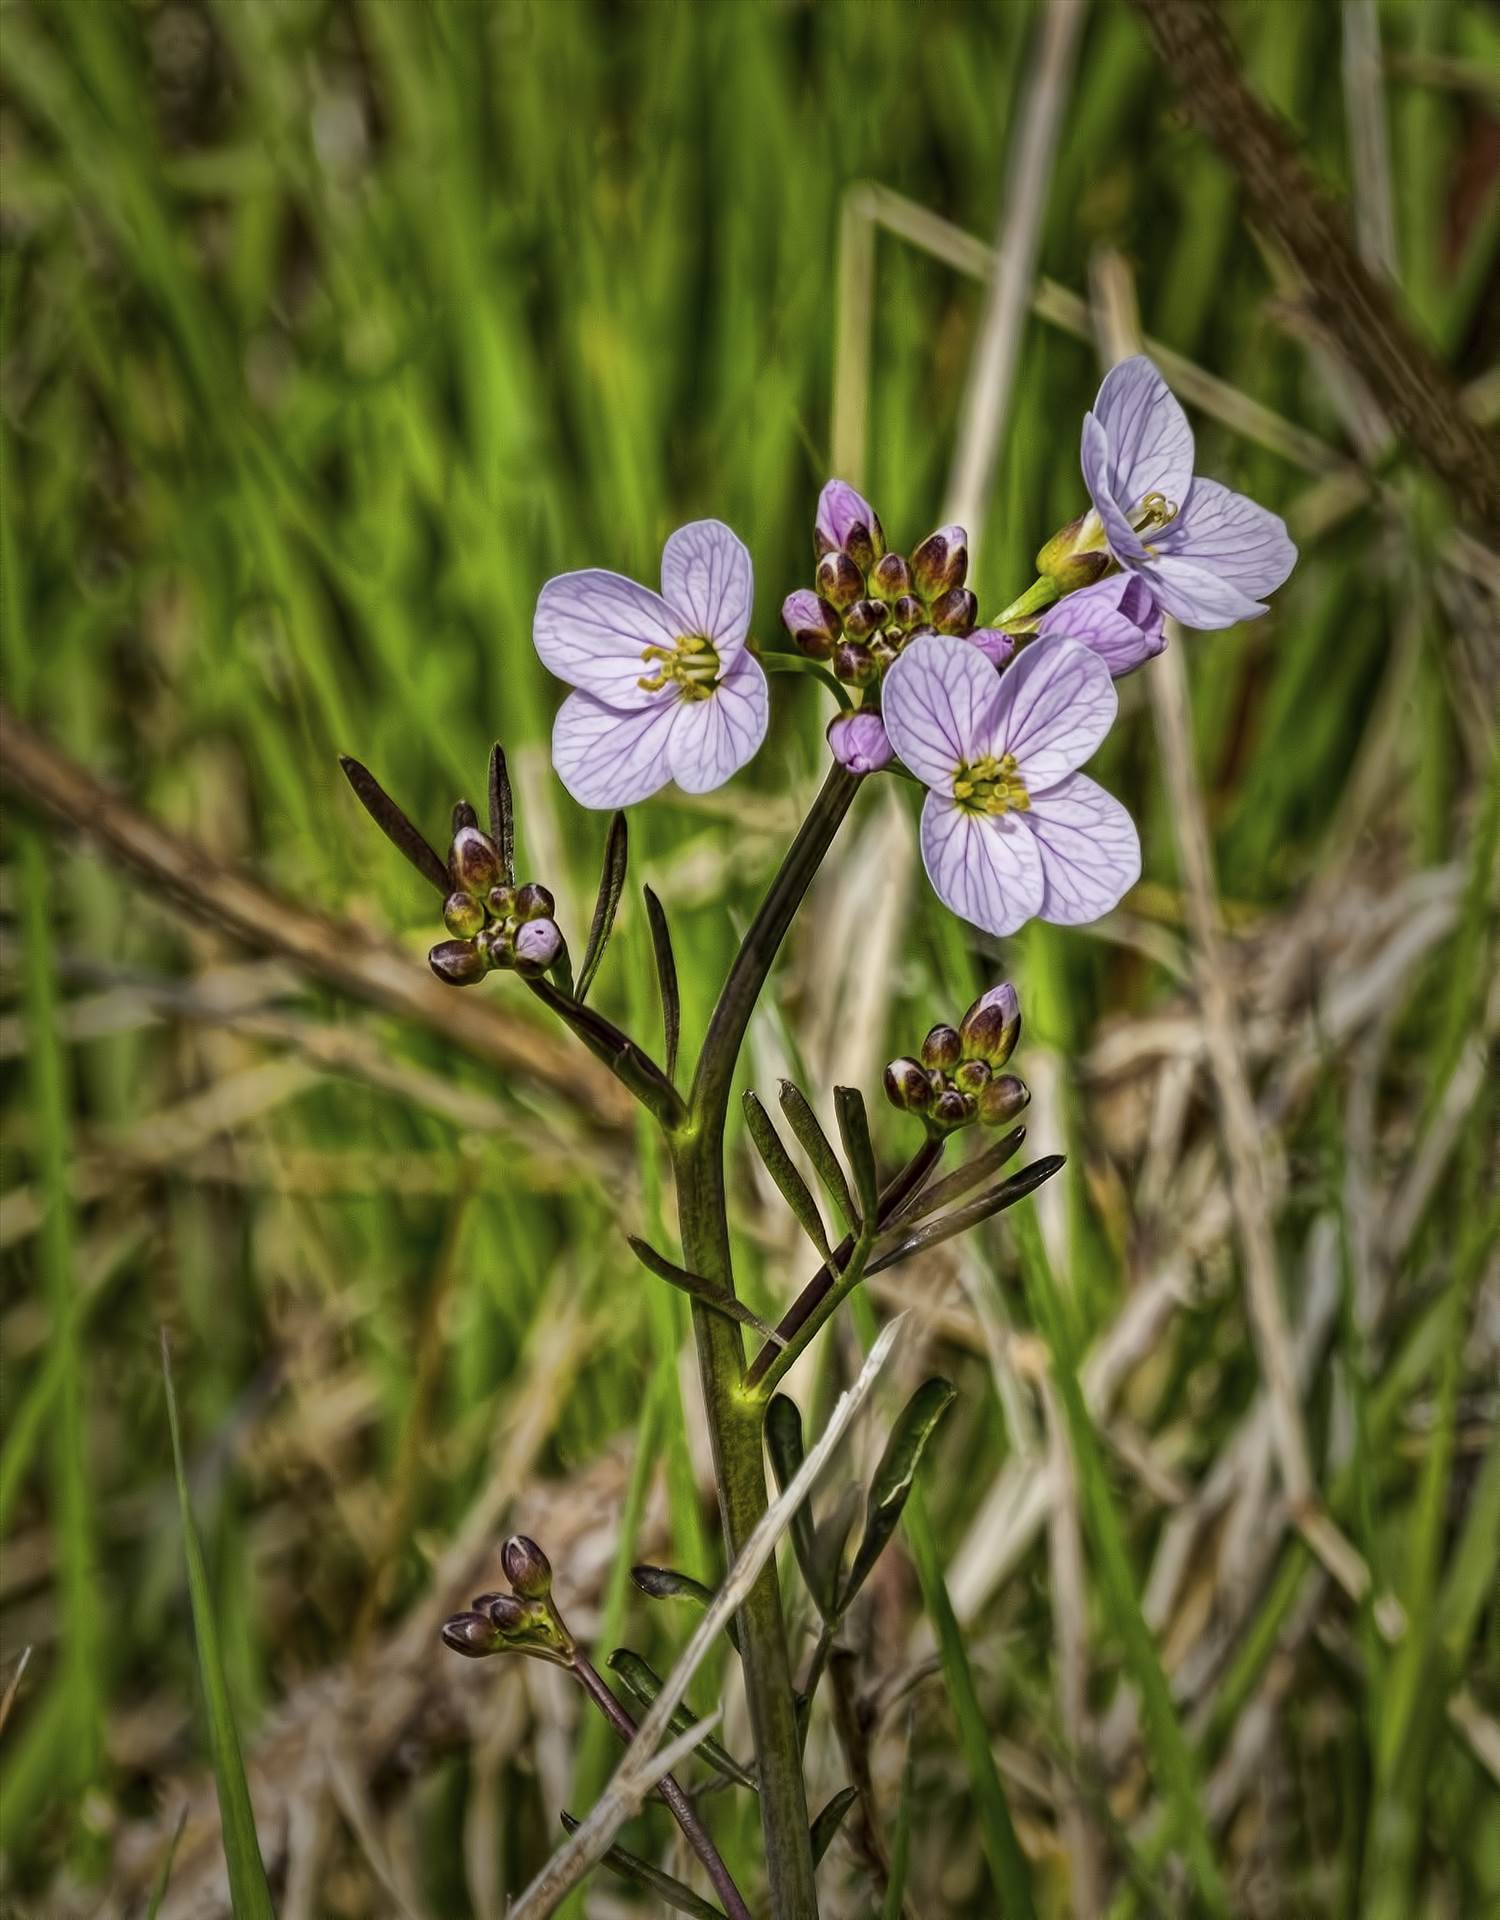 Cuckoo Flower.jpg undefined by WPC-208